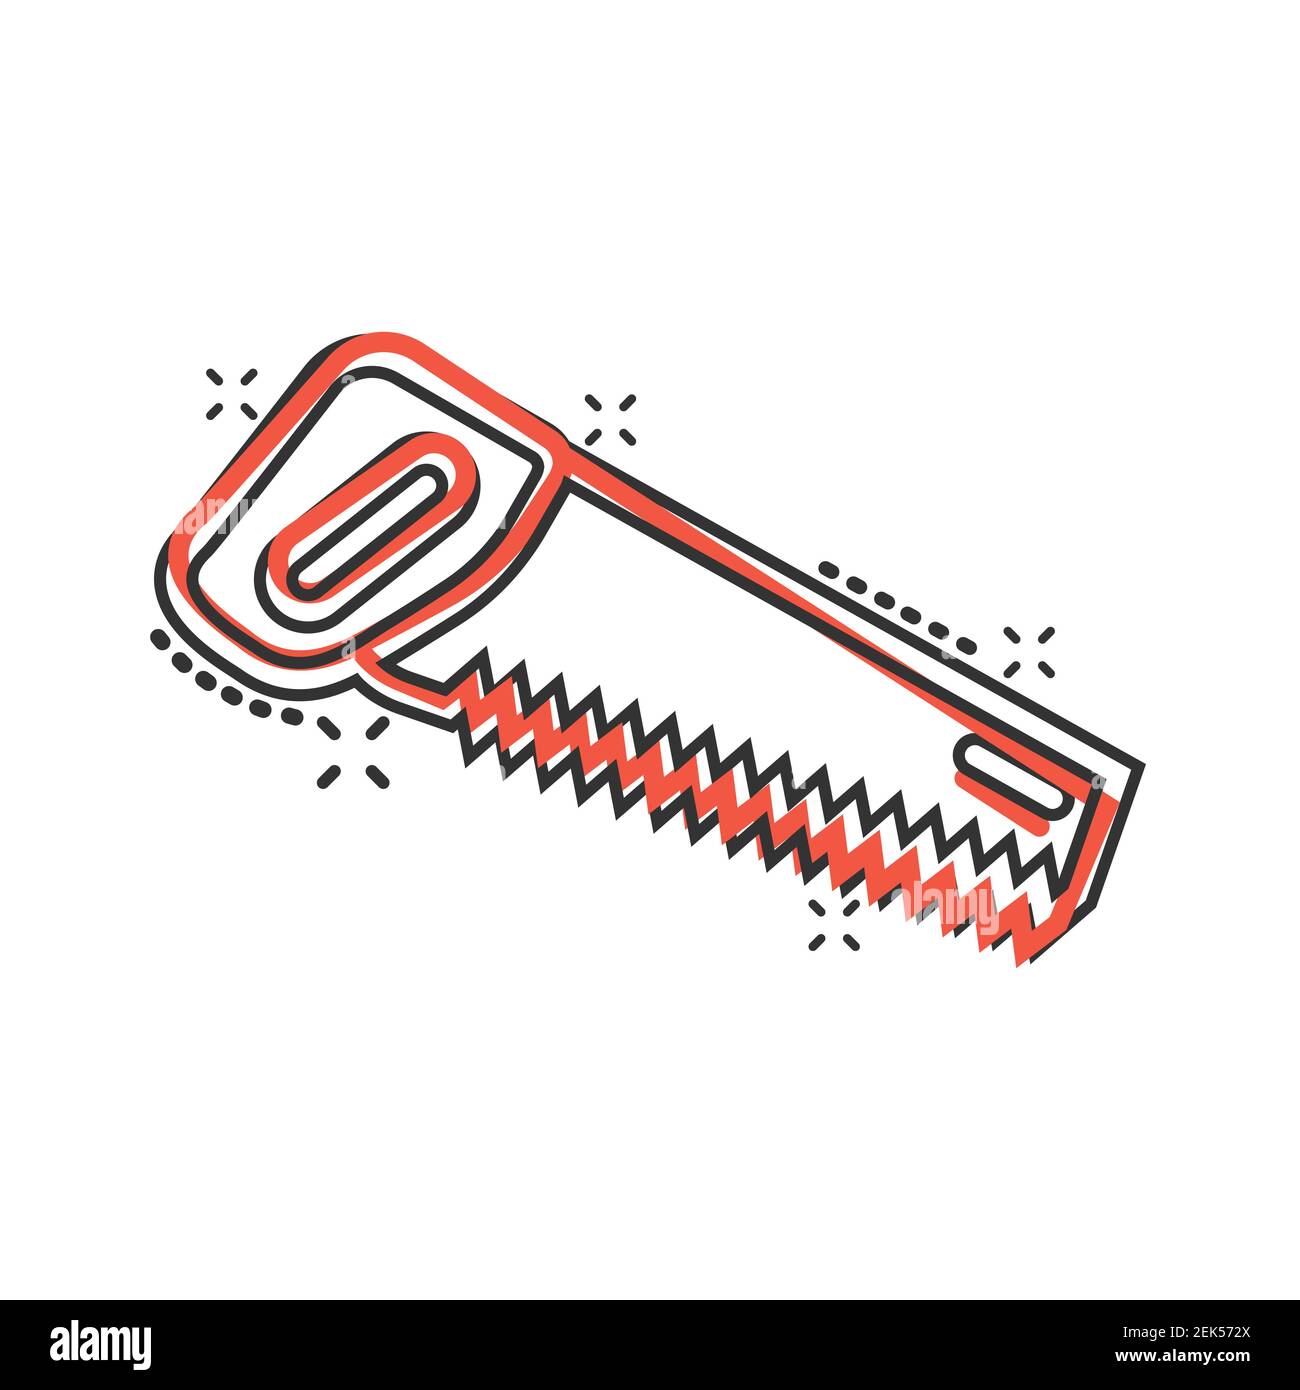 Saw blade icon in comic style. Working tools cartoon vector illustration on white isolated background. Hammer splash effect business concept. Stock Vector